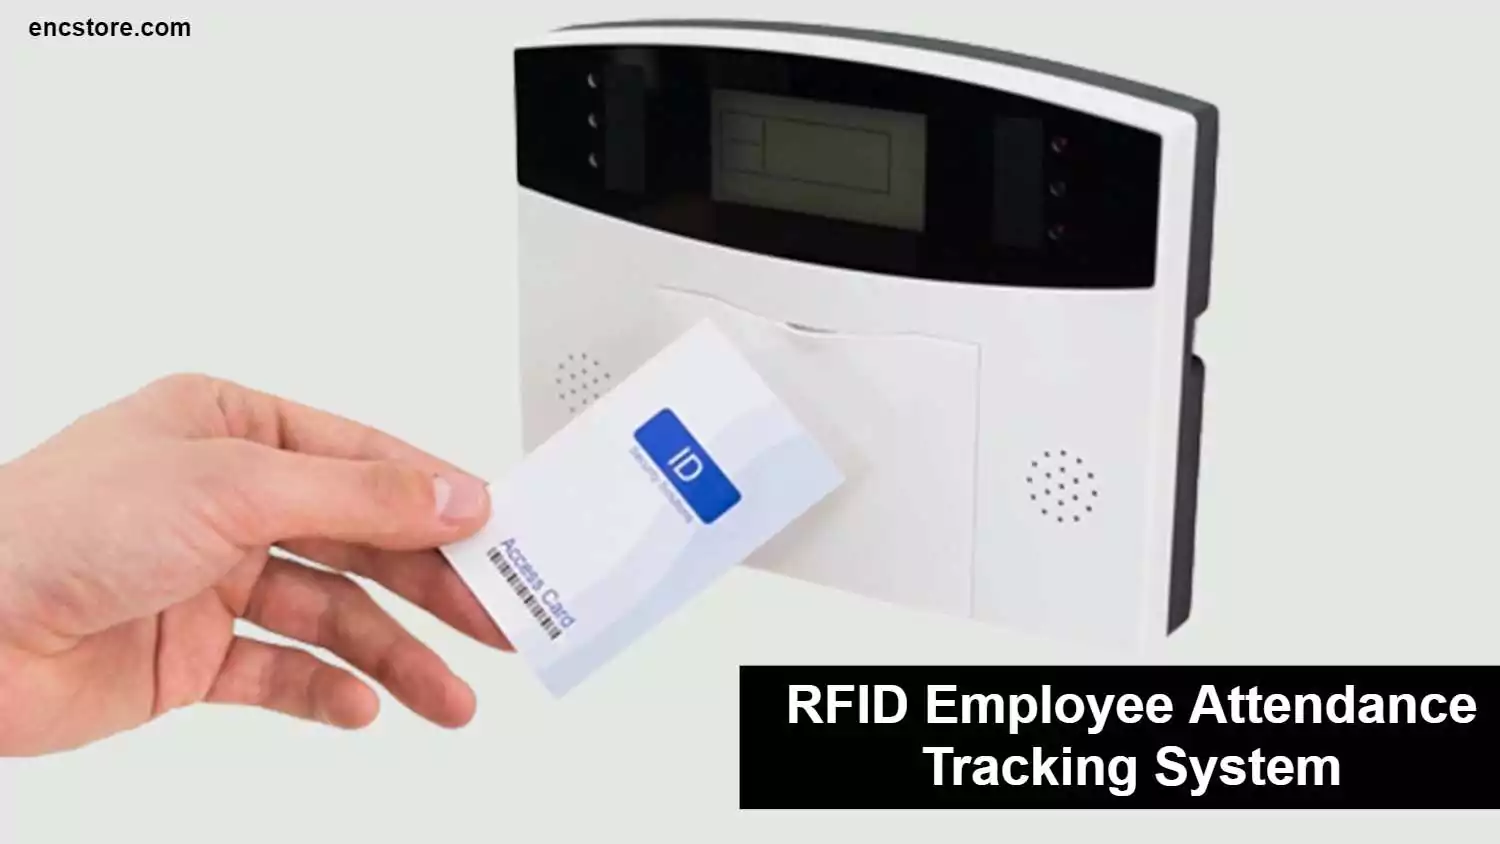 RFID Employee Attendance Tracking System